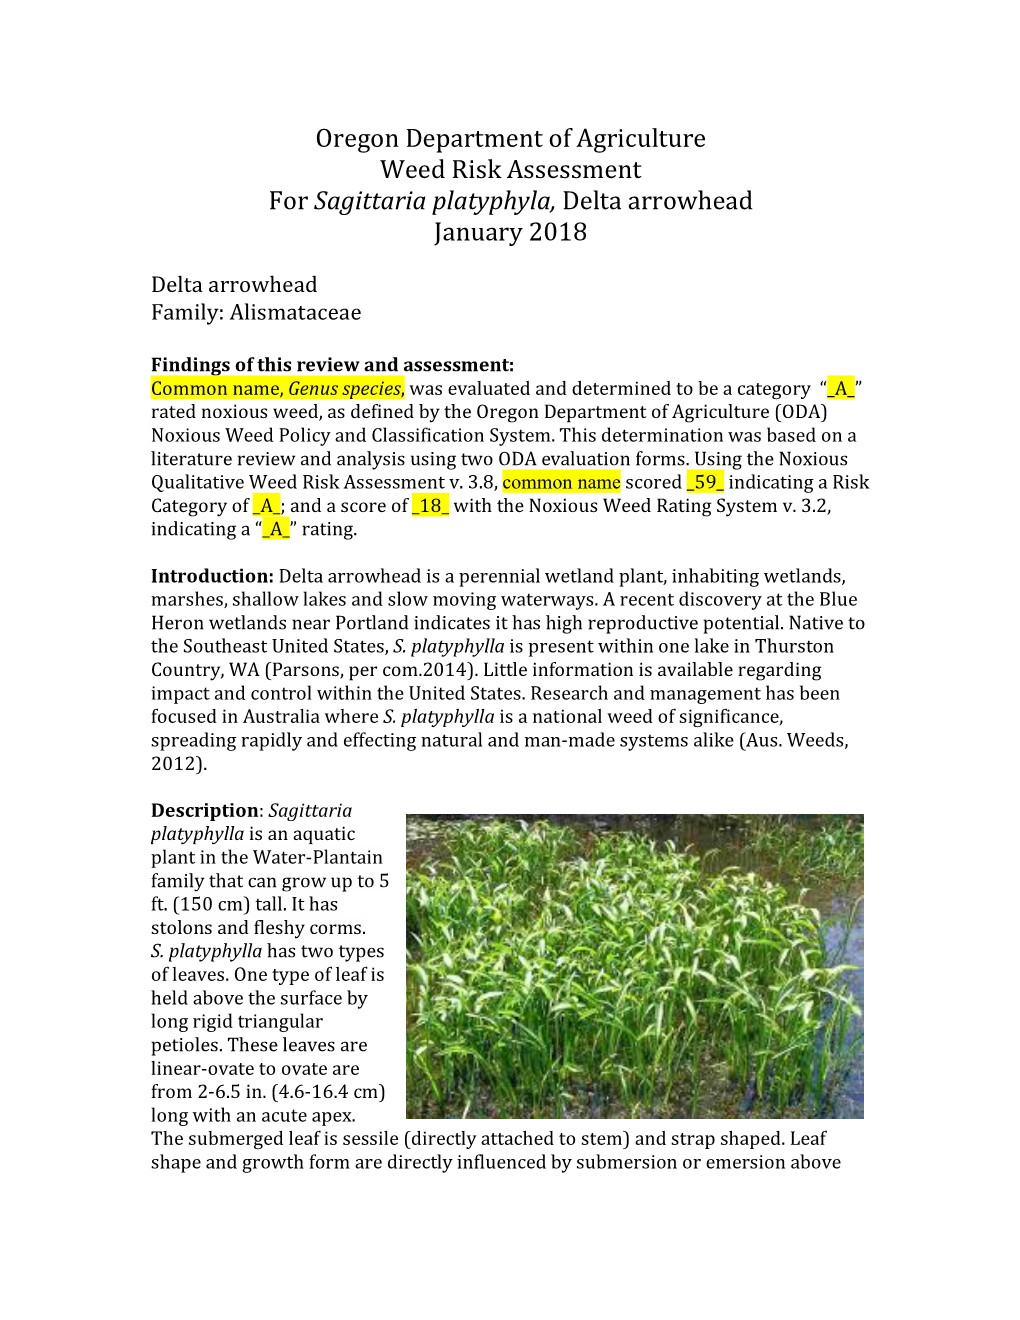 Oregon Department of Agriculture Weed Risk Assessment for Sagittaria Platyphyla, Delta Arrowhead January 2018